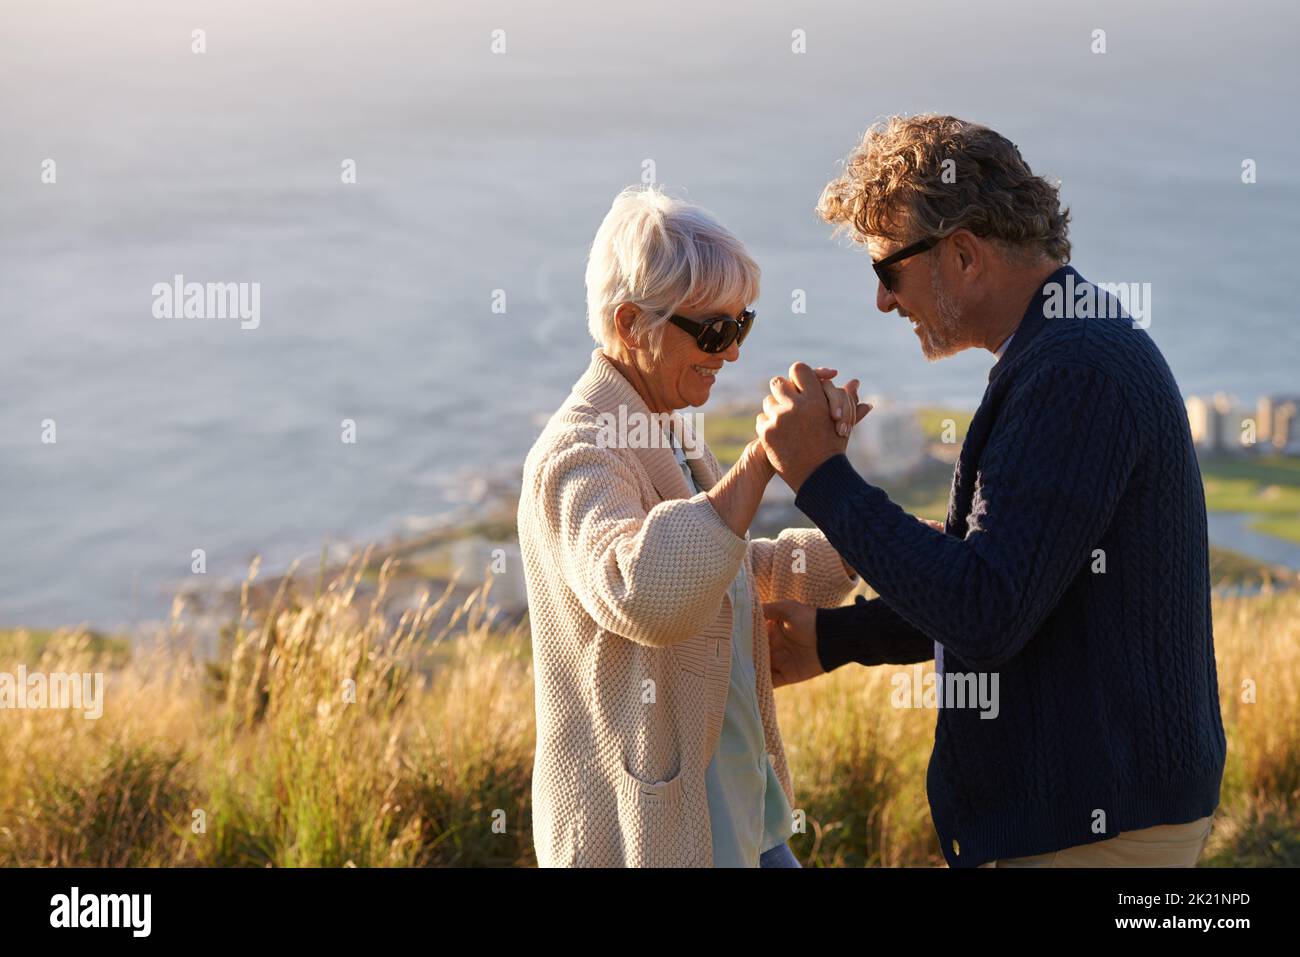 Shall we dance. Cropped view of a senior couple dancing on a hillside together. Stock Photo